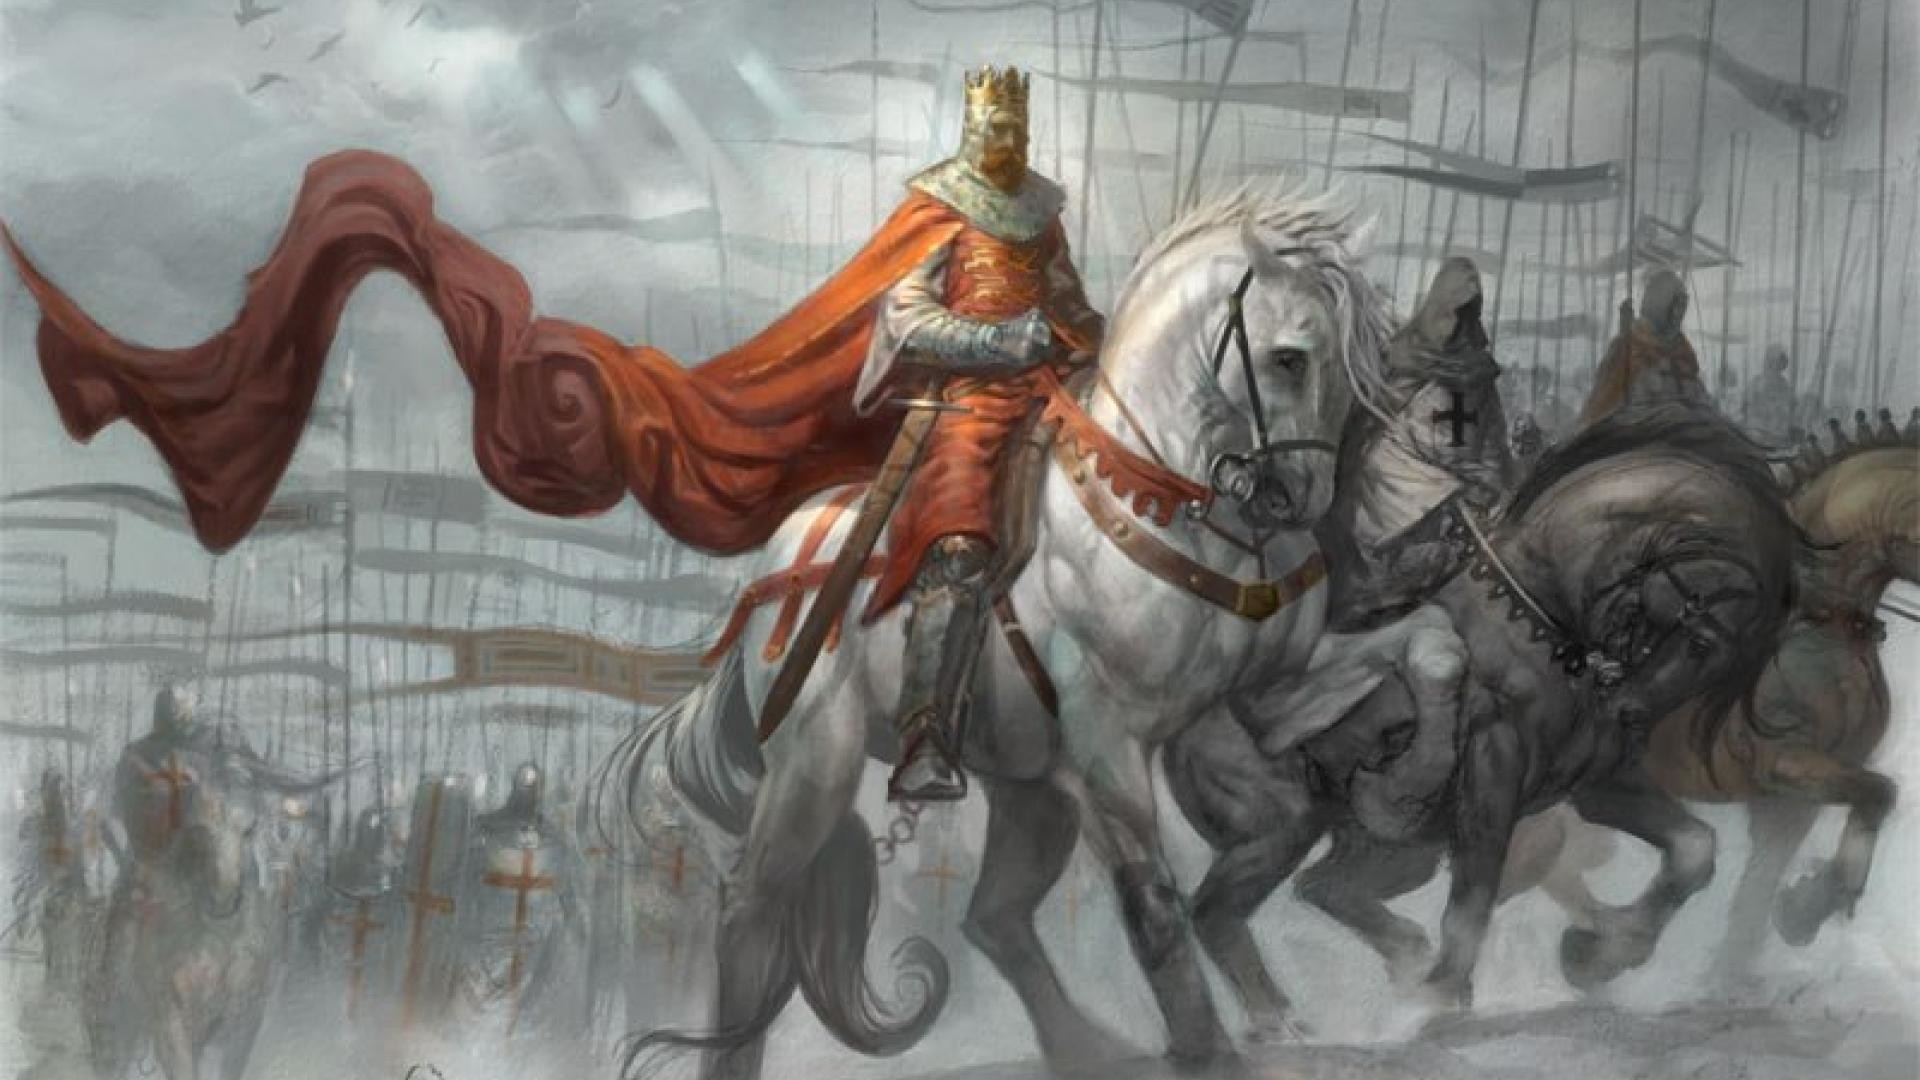 1920x1080 Richard the Lionheart leads Templar Knights during the Third Crusade